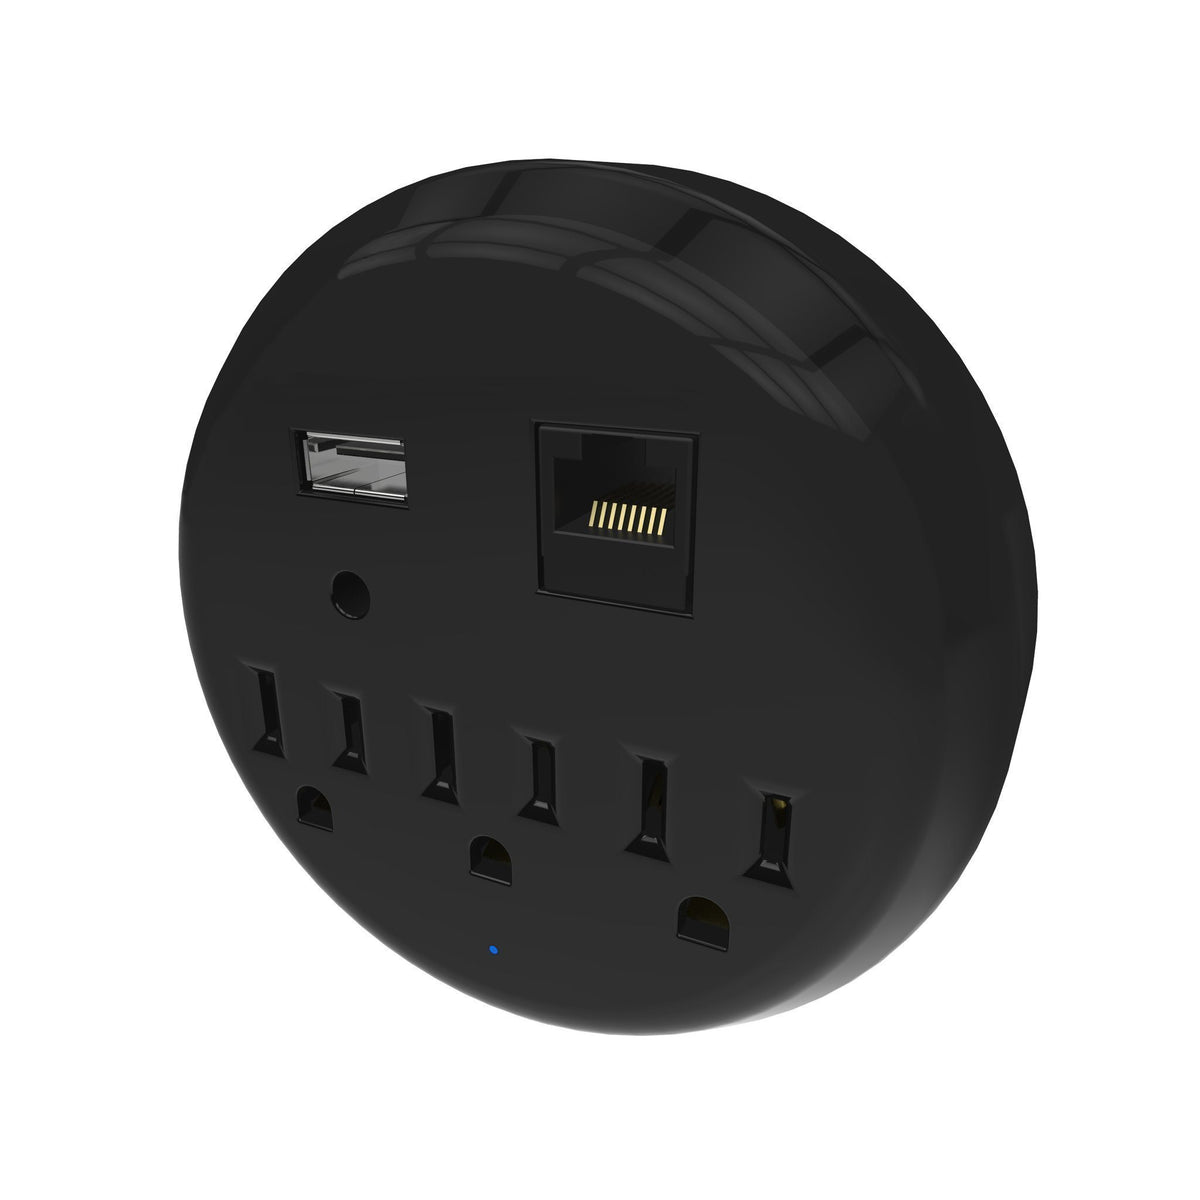 Accessory - Security - USB Power Outlet Kit | Liberty Safe Norcal.